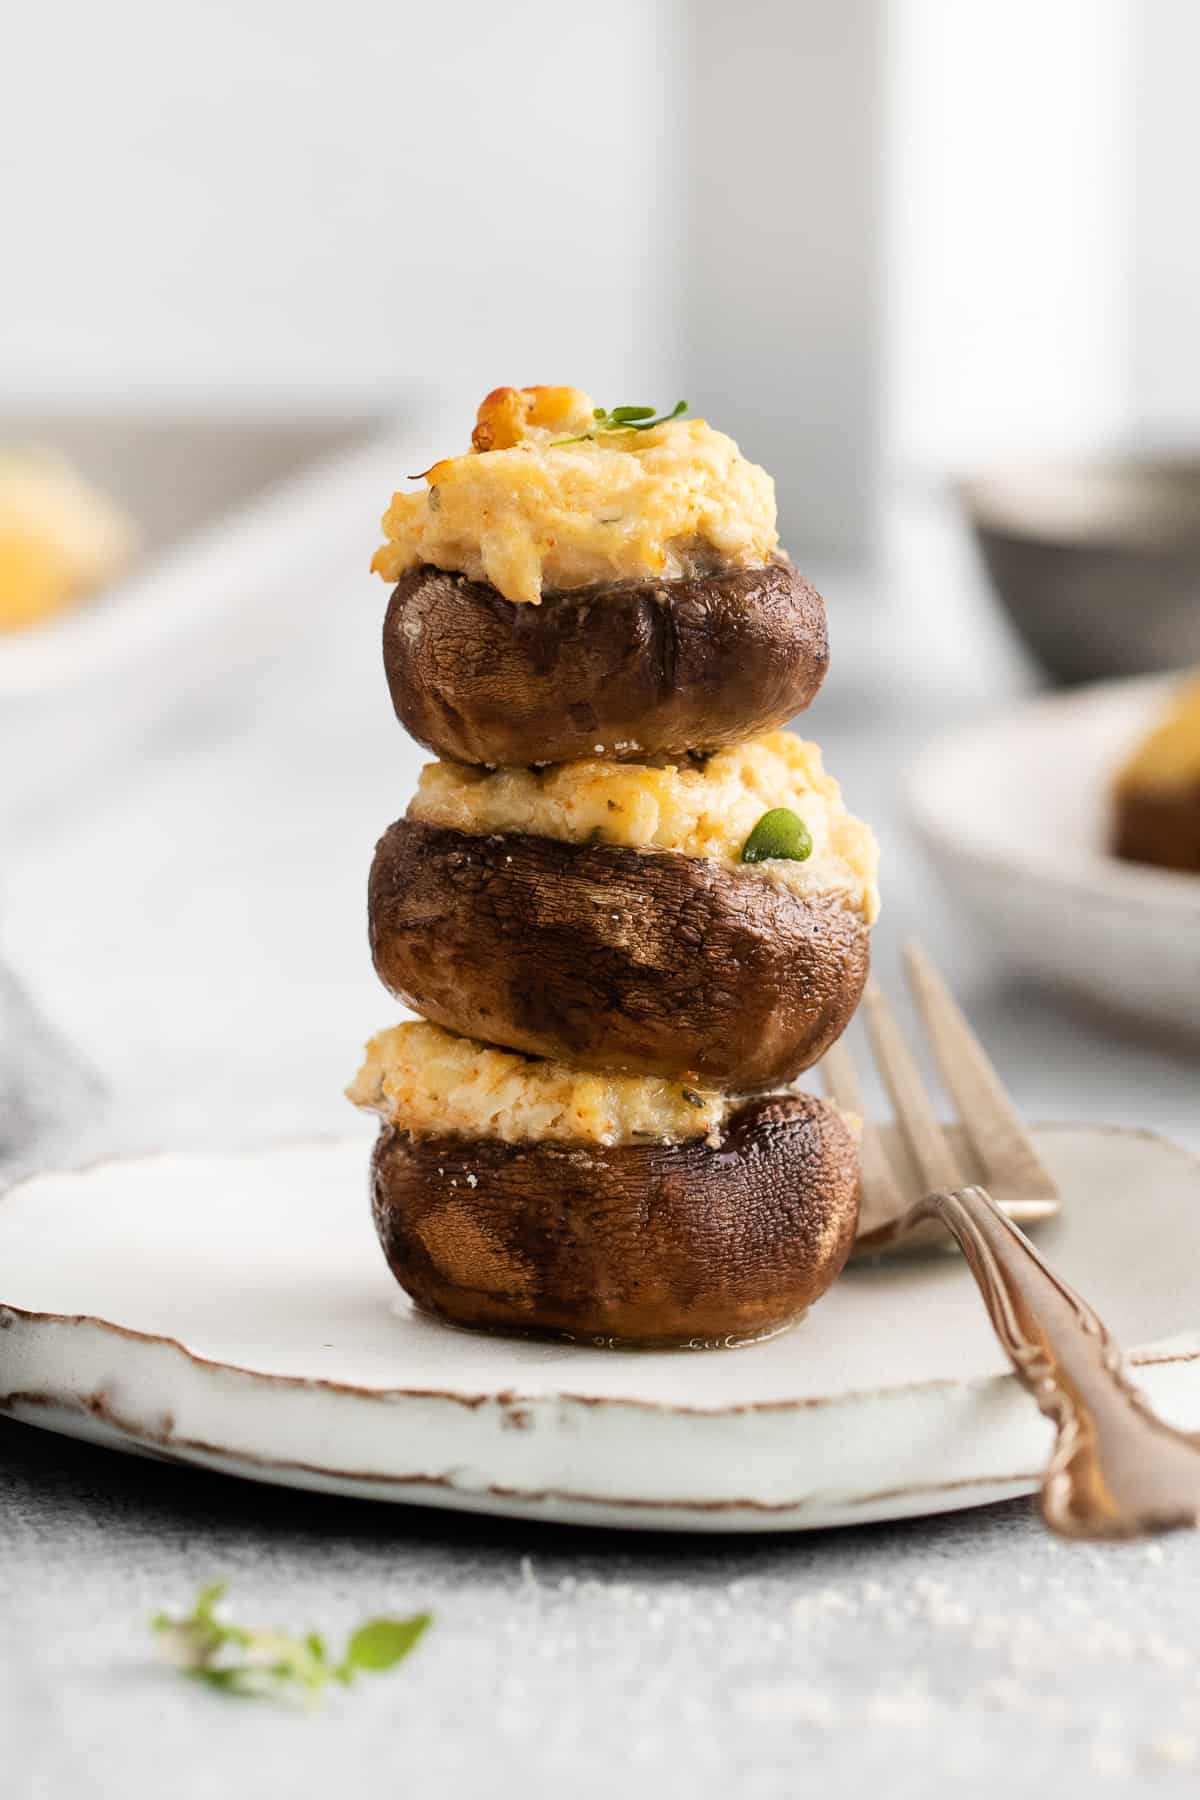 Crab stuffed mushrooms stacked on a plate.